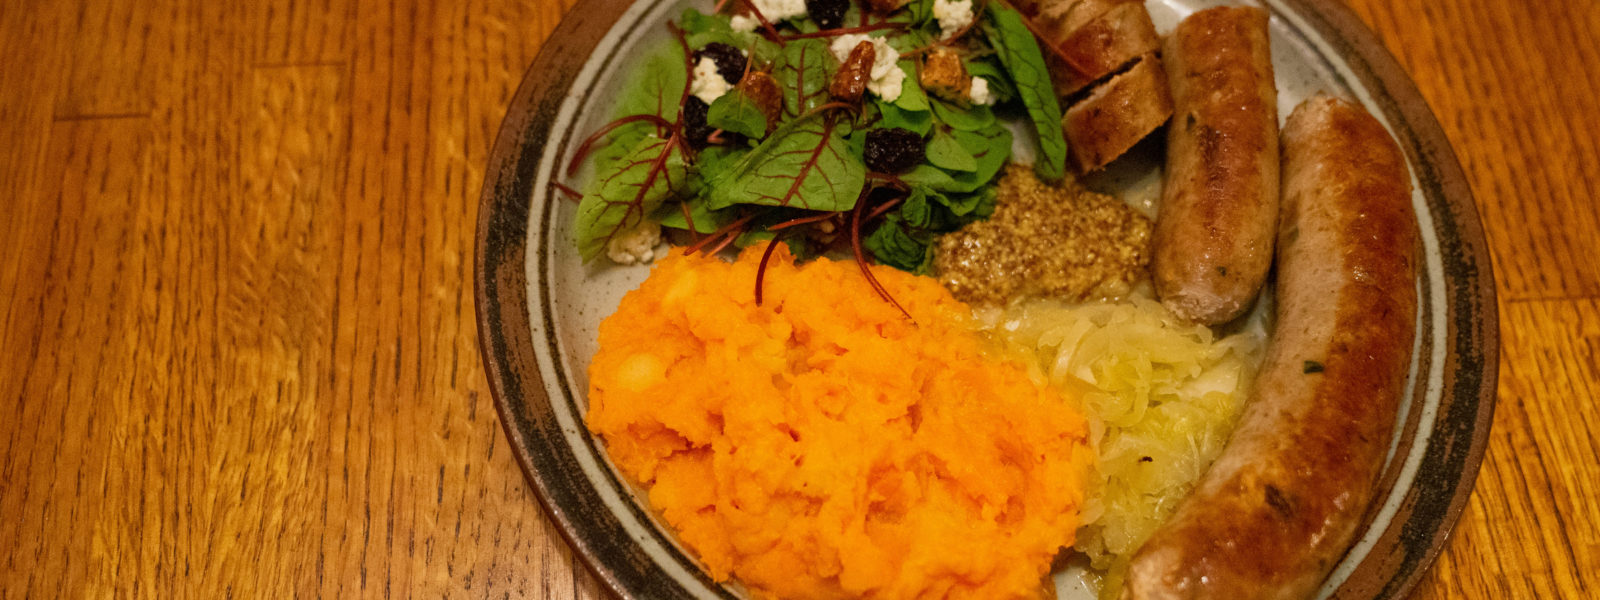 sauasage with plate of sweet potatoes, salad, and mustard